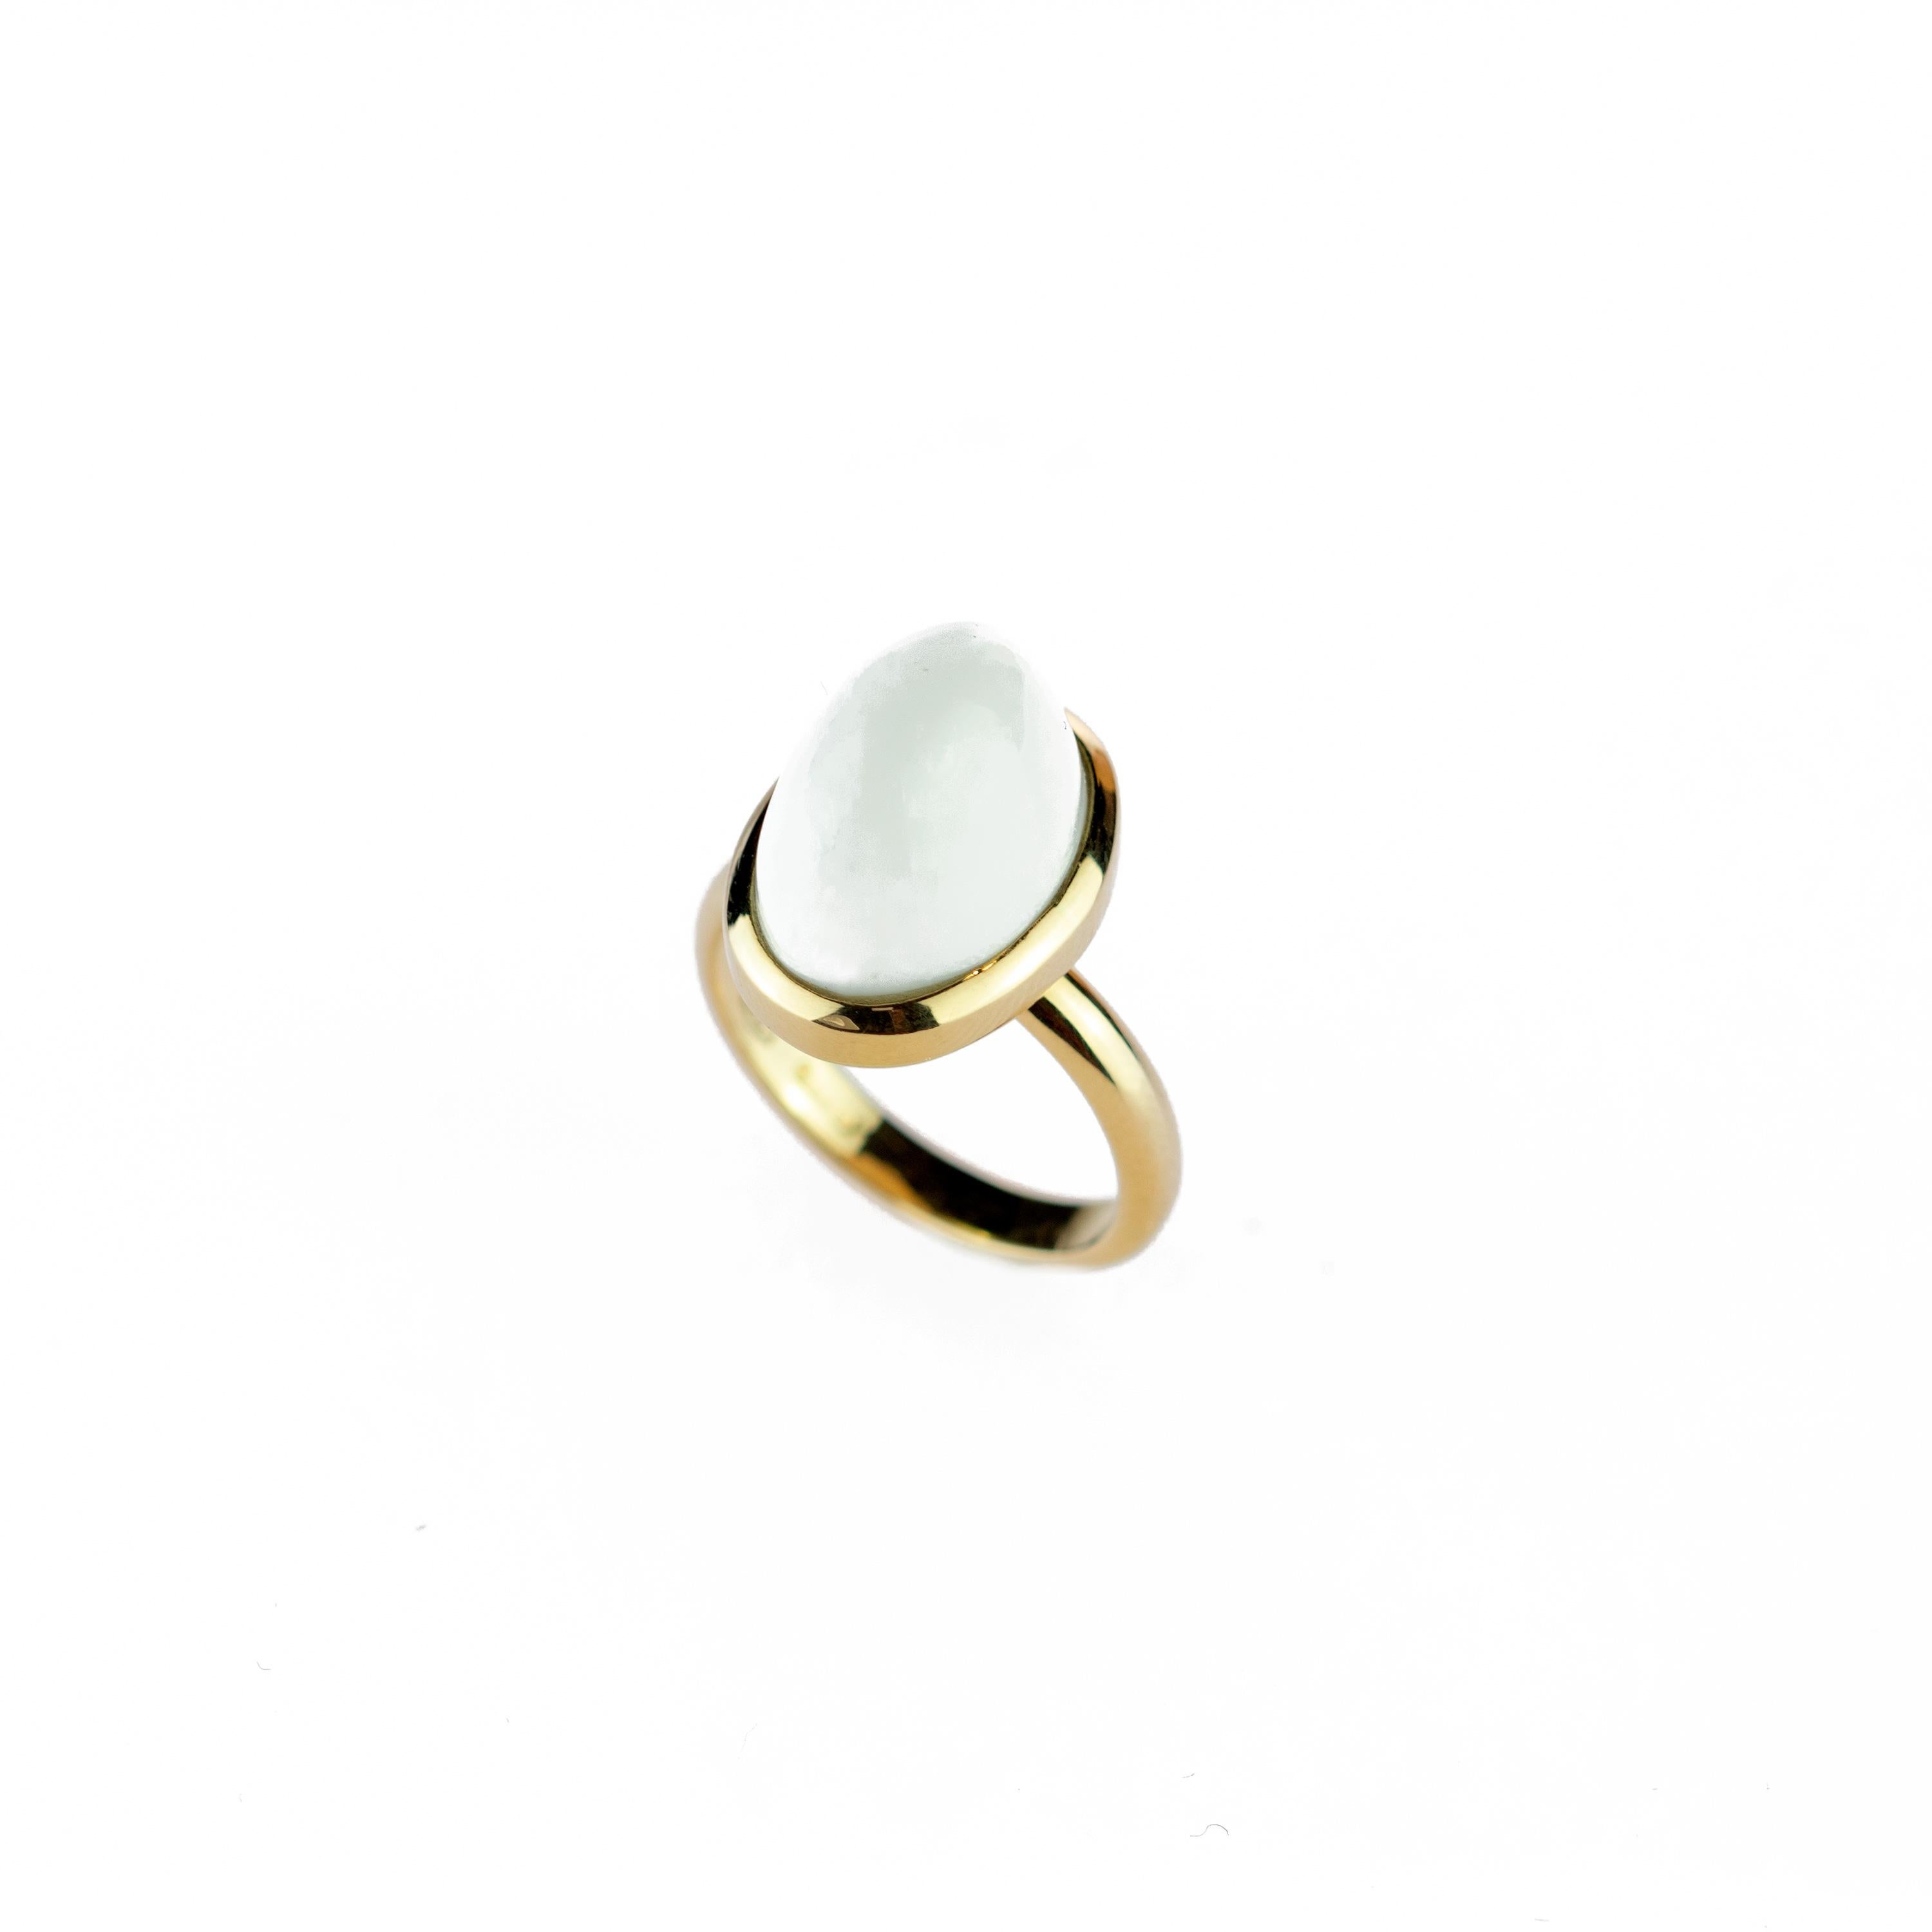 This minimalist design enhances a matte precious natural 11 carats agate cabochon. The 18 karat gold ring highlights the white color, surrounding into a glamorous and eccentric touch. 
 
This design is inspired by the simplicity of everyday life.